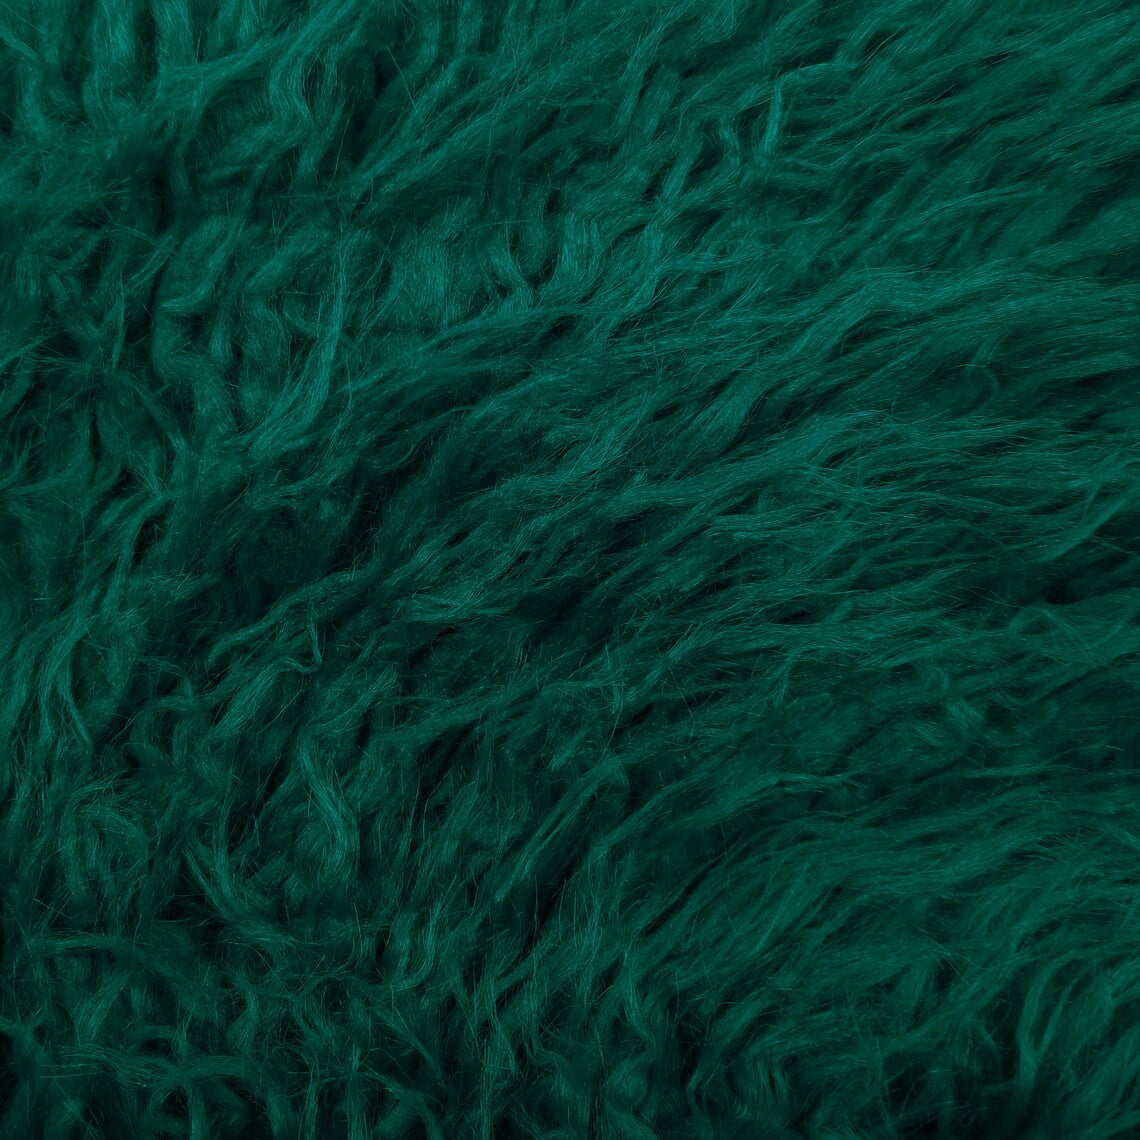 FREE SHIPPING!!! Light Teal Mongolian Sheep Wool 2-3 Inches Long Pile Faux  Fur Fabric by the Yard